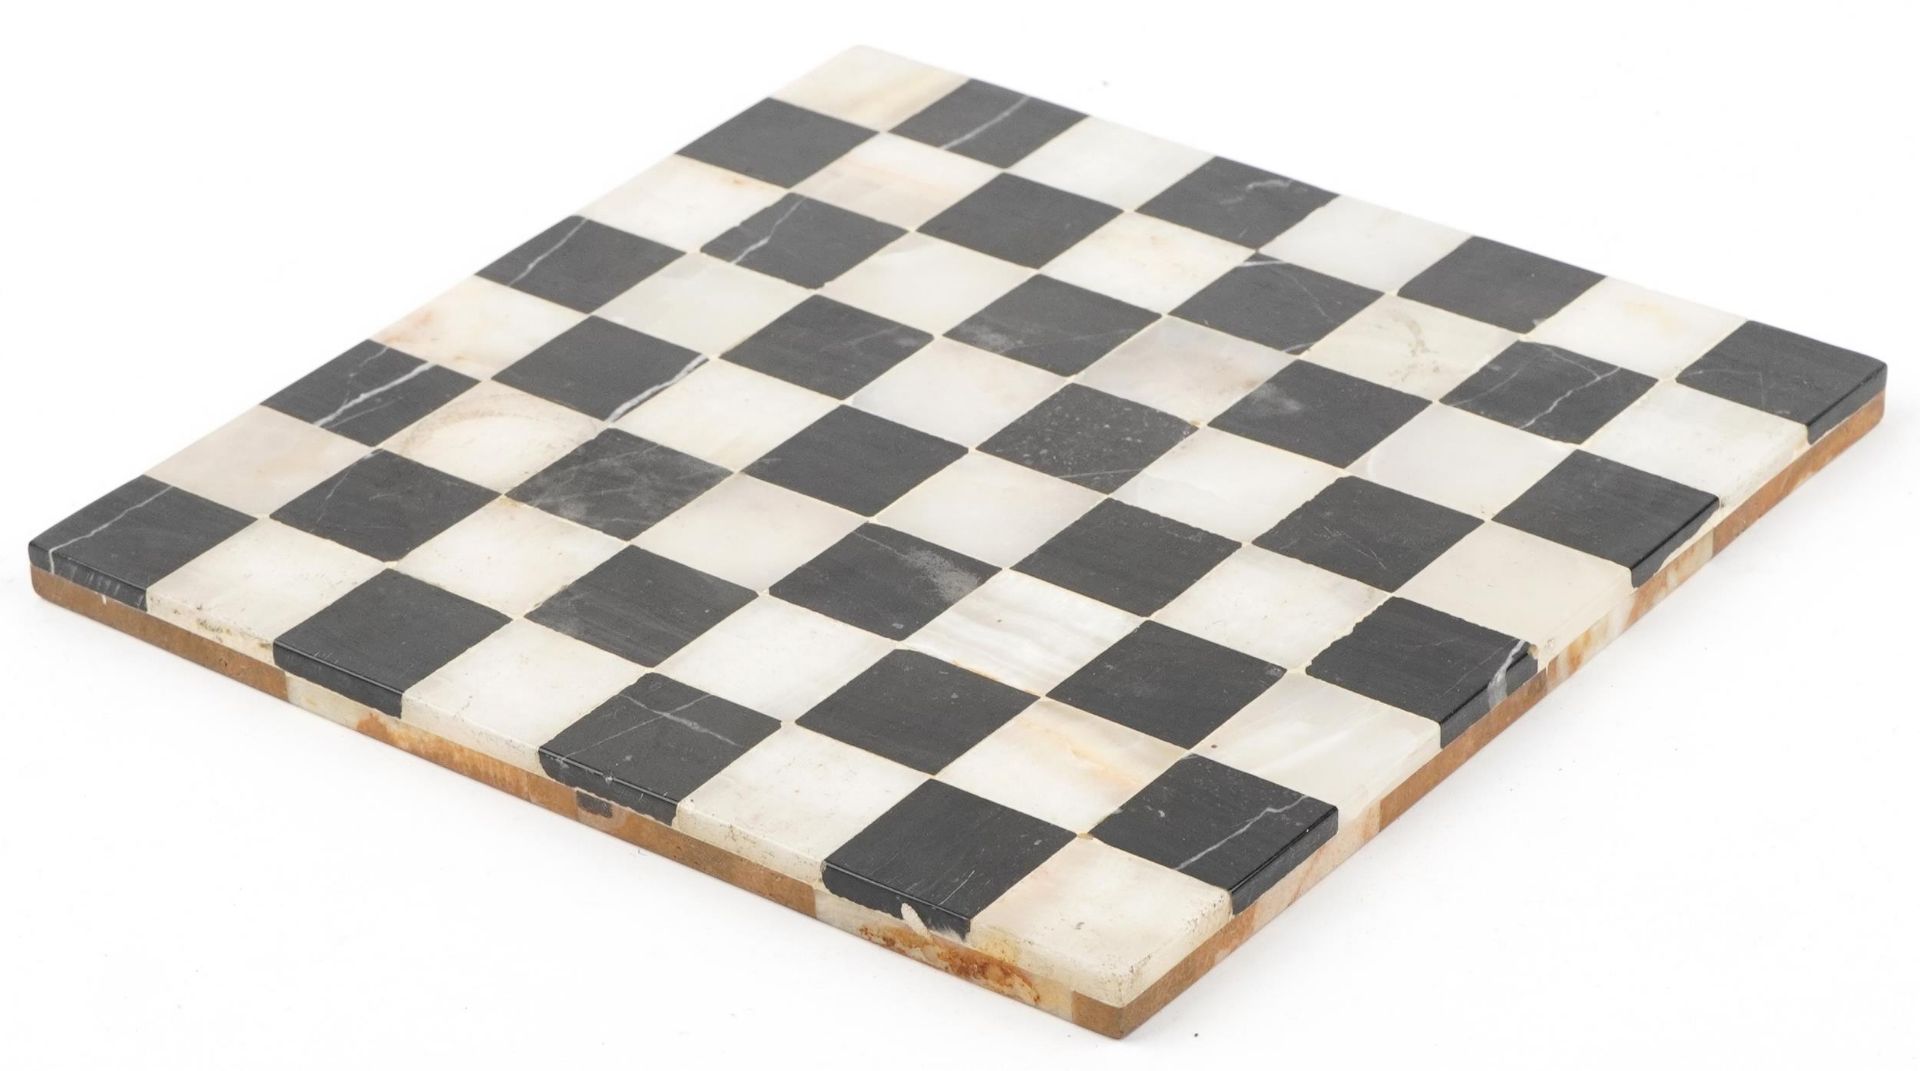 Black marble and onyx chess board, 28.5cm x 28.5cm - Image 2 of 4